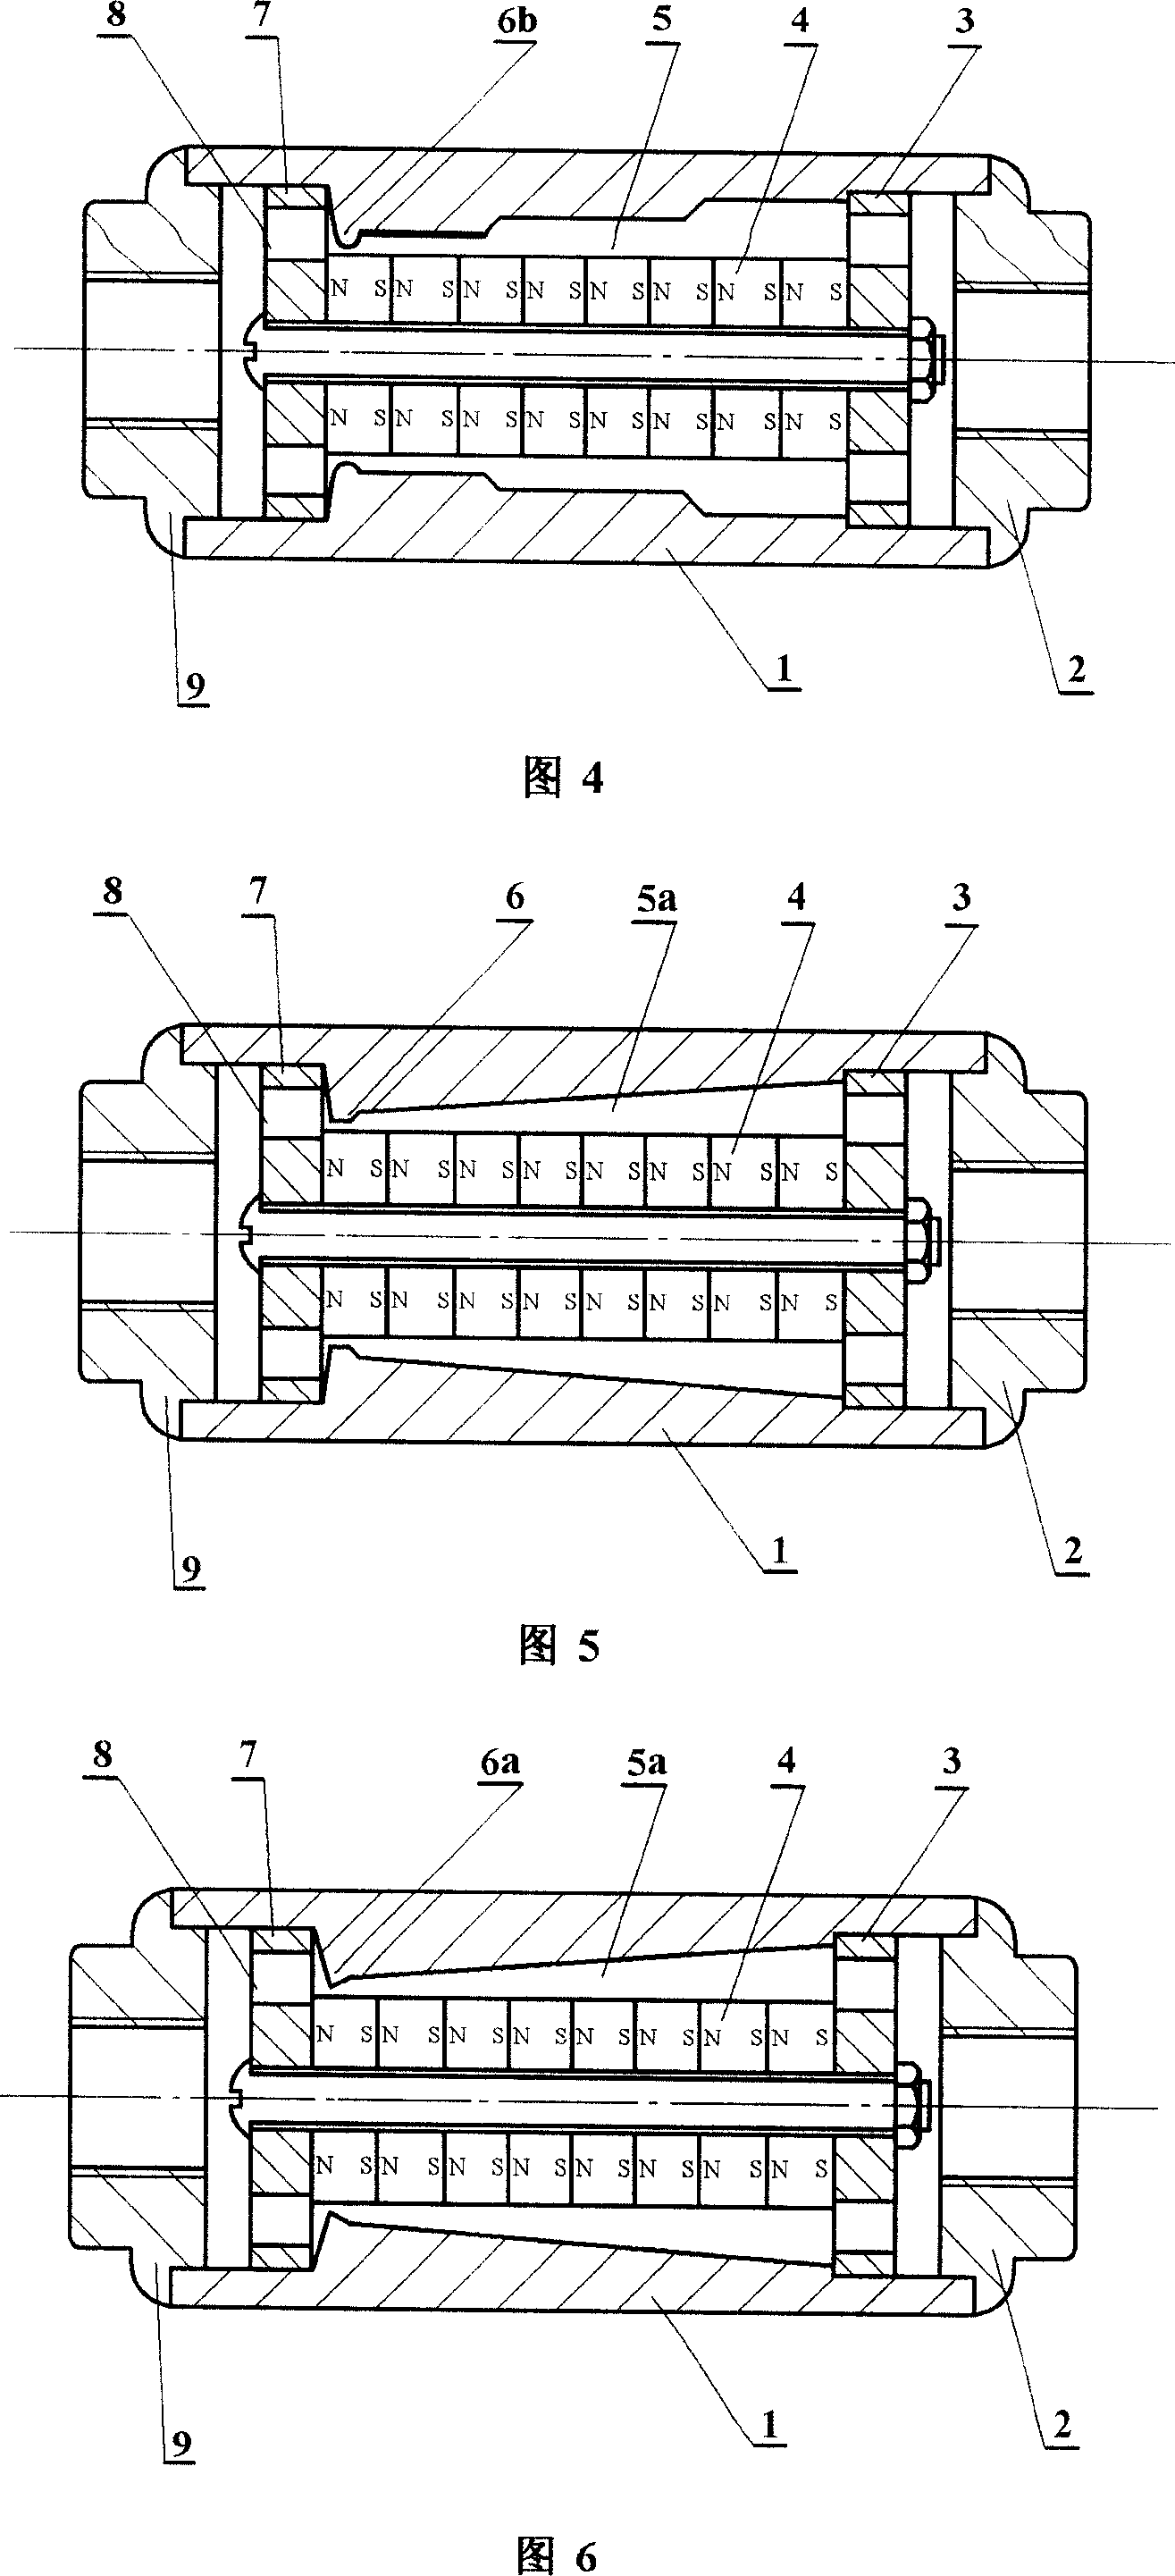 Magnetization device for saving oil